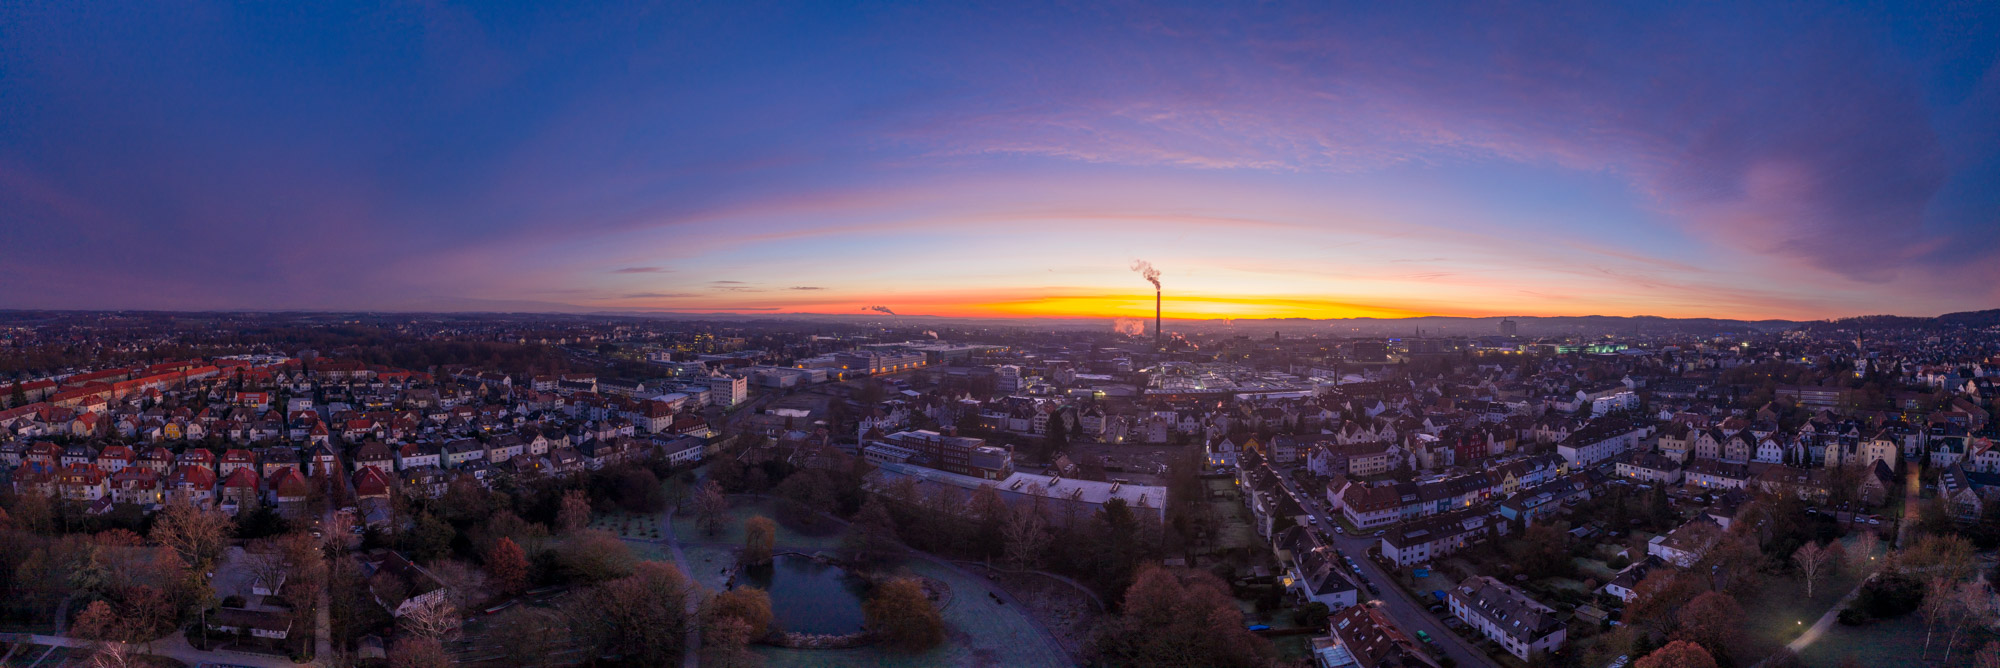 Winter sunrise over Bielefeld at eight o'clock in the morning (Germany)